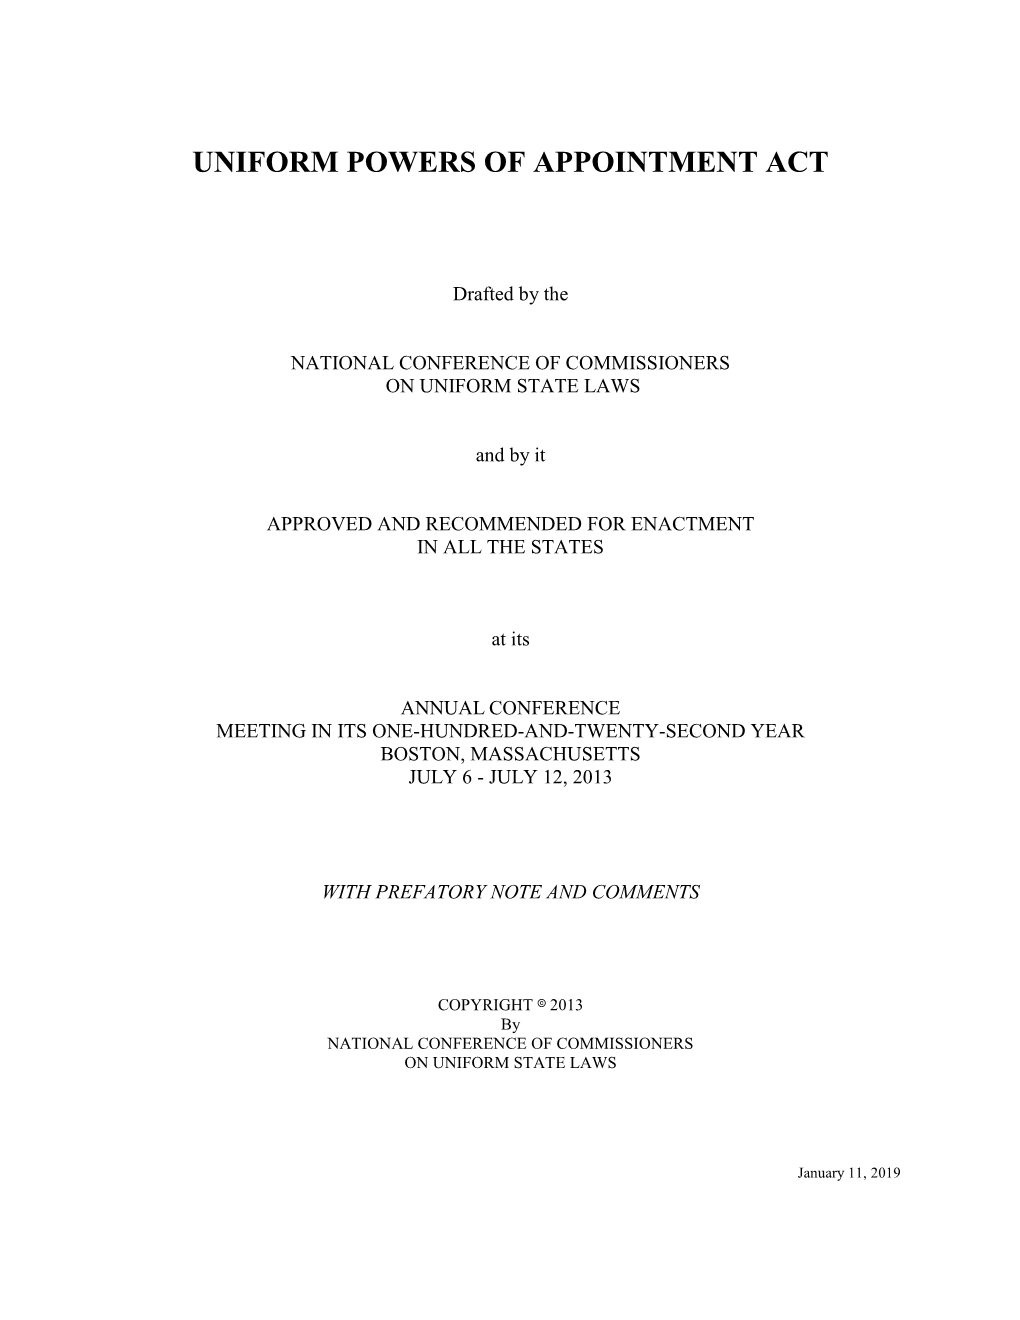 Final Act, with Comments: Uniform Powers of Appointment